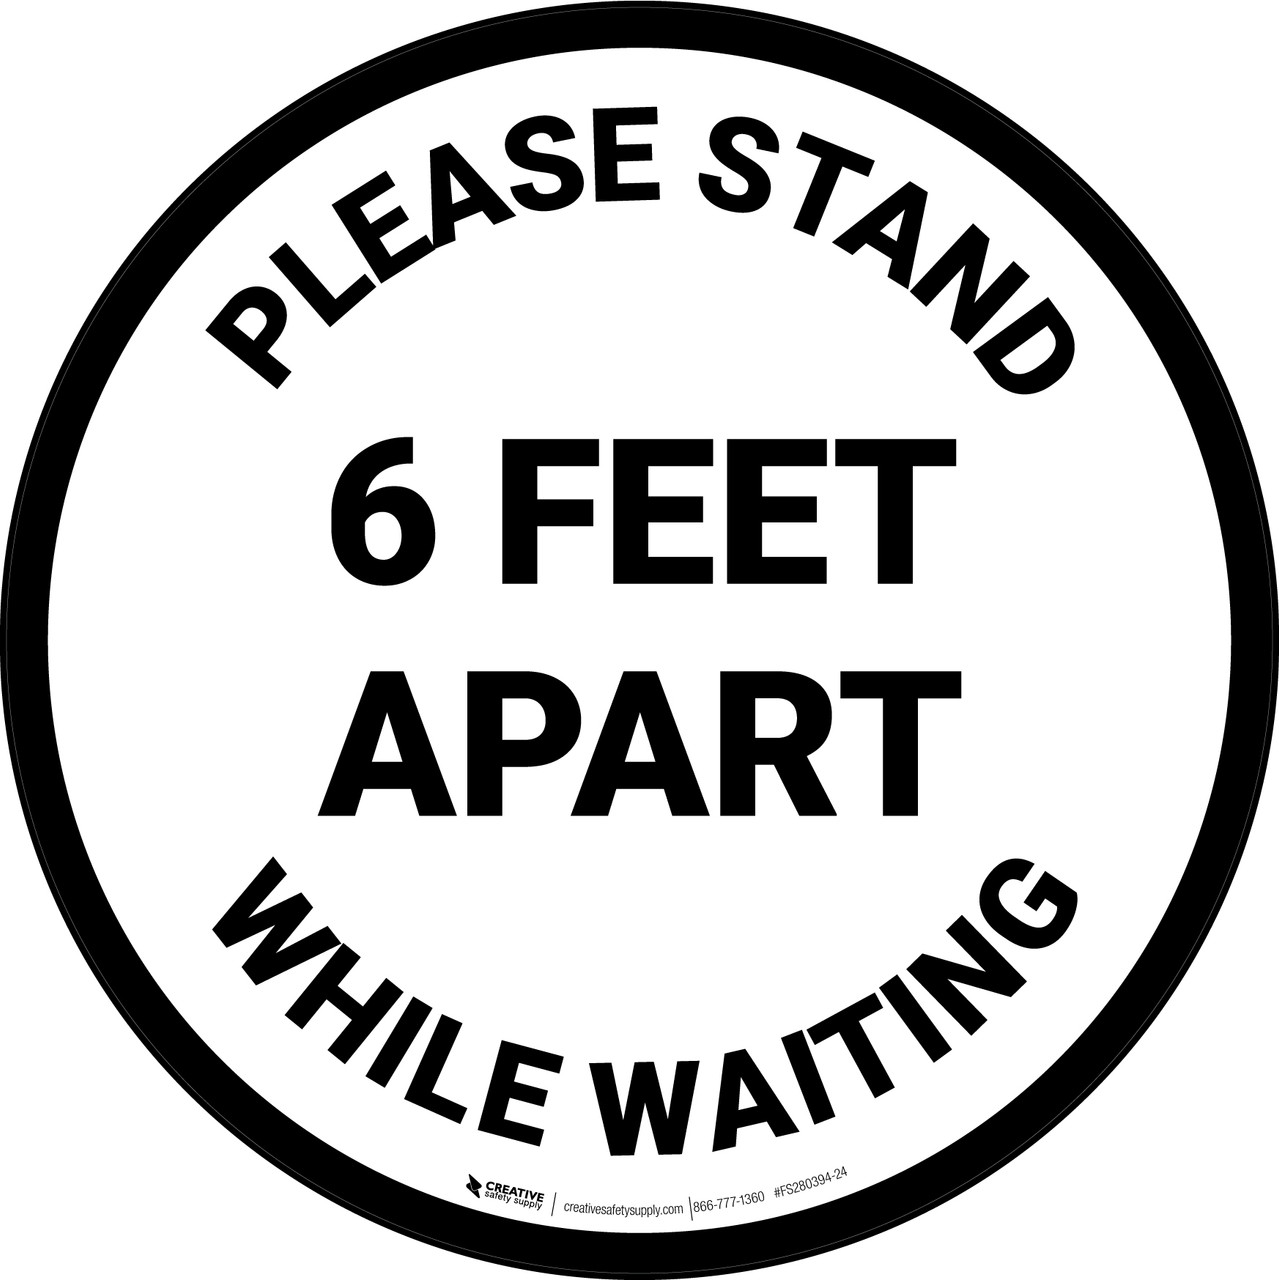 Please Stand Feet Apart While Waiting Circular Floor Sign 5S Today